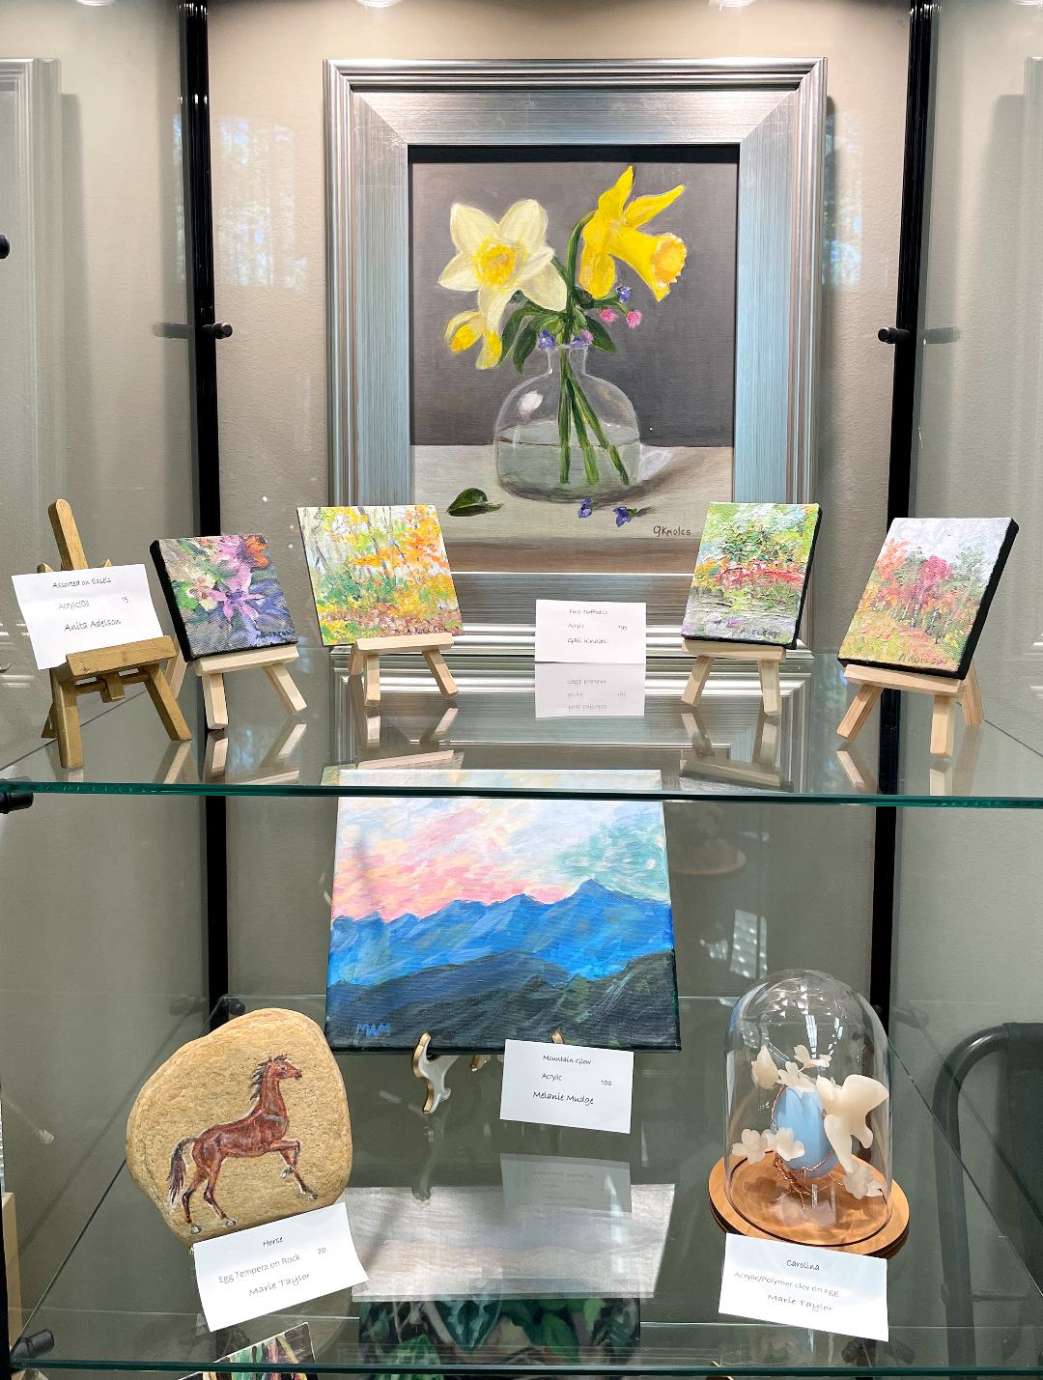 Artwork on display in a multi-shelf glass display case at Sertoma Arts Center